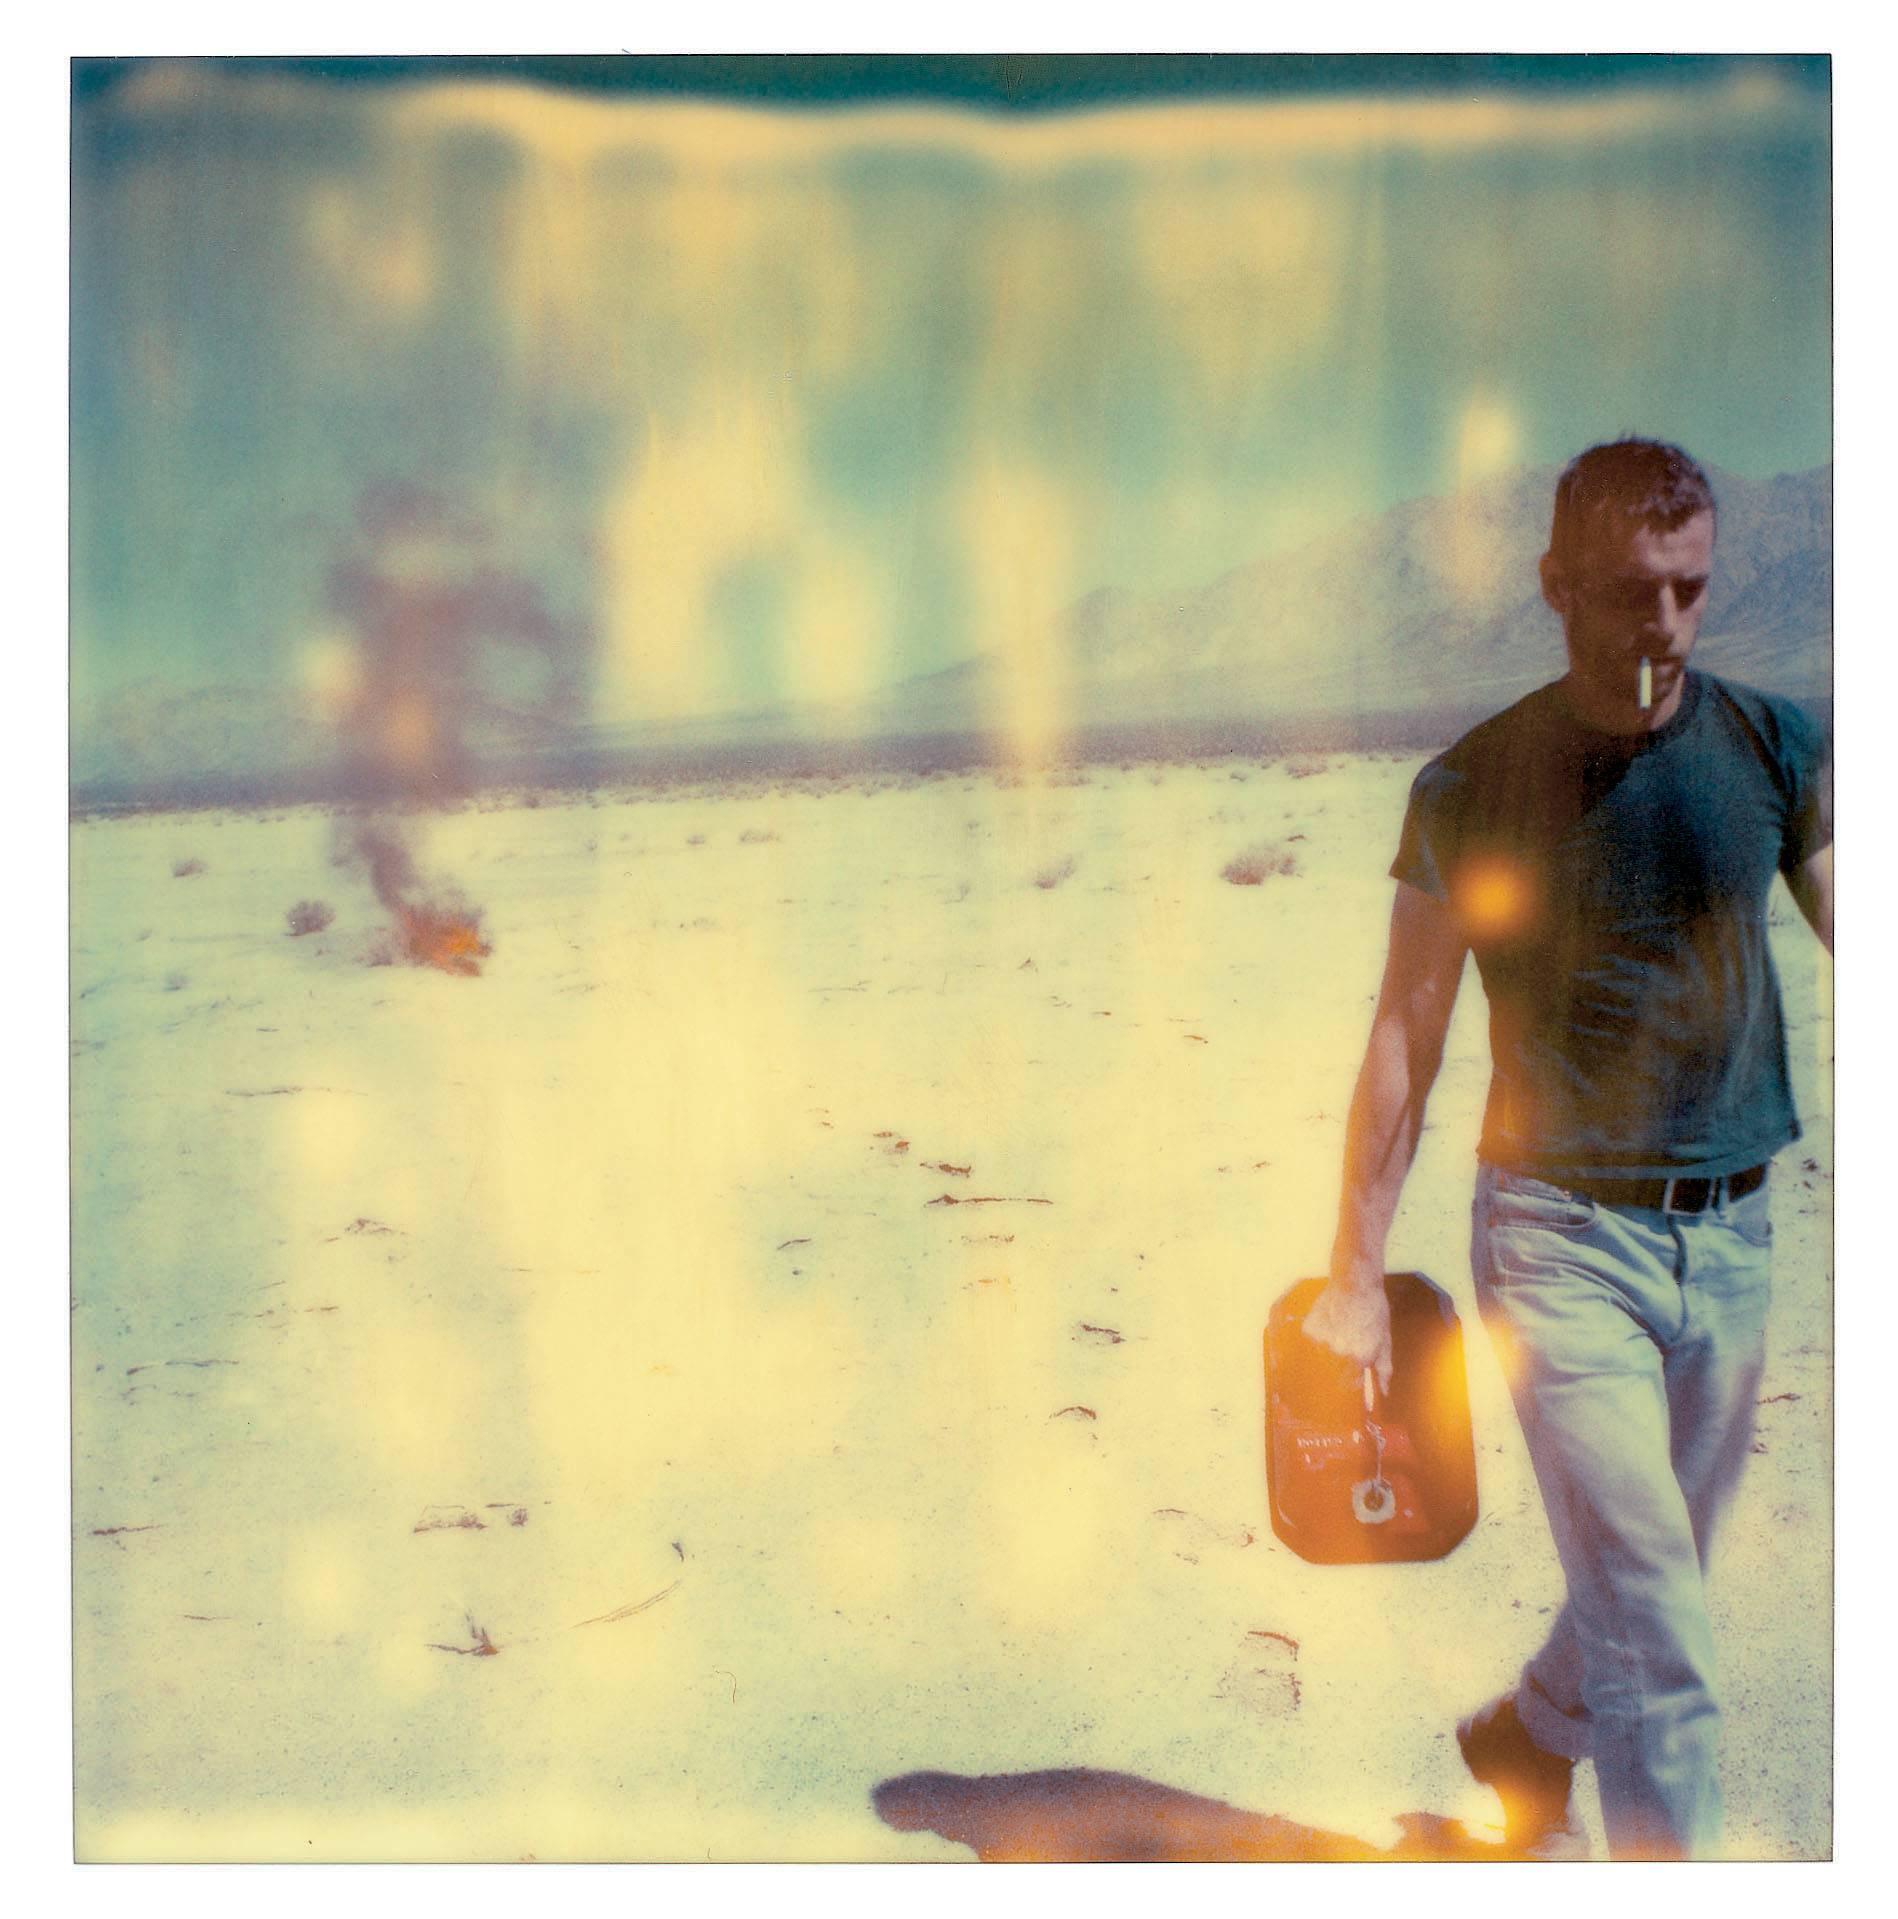 Gasoline II, triptych - Stranger than Paradise - Sold out Edition of 5, AP 1/2 - Beige Figurative Photograph by Stefanie Schneider